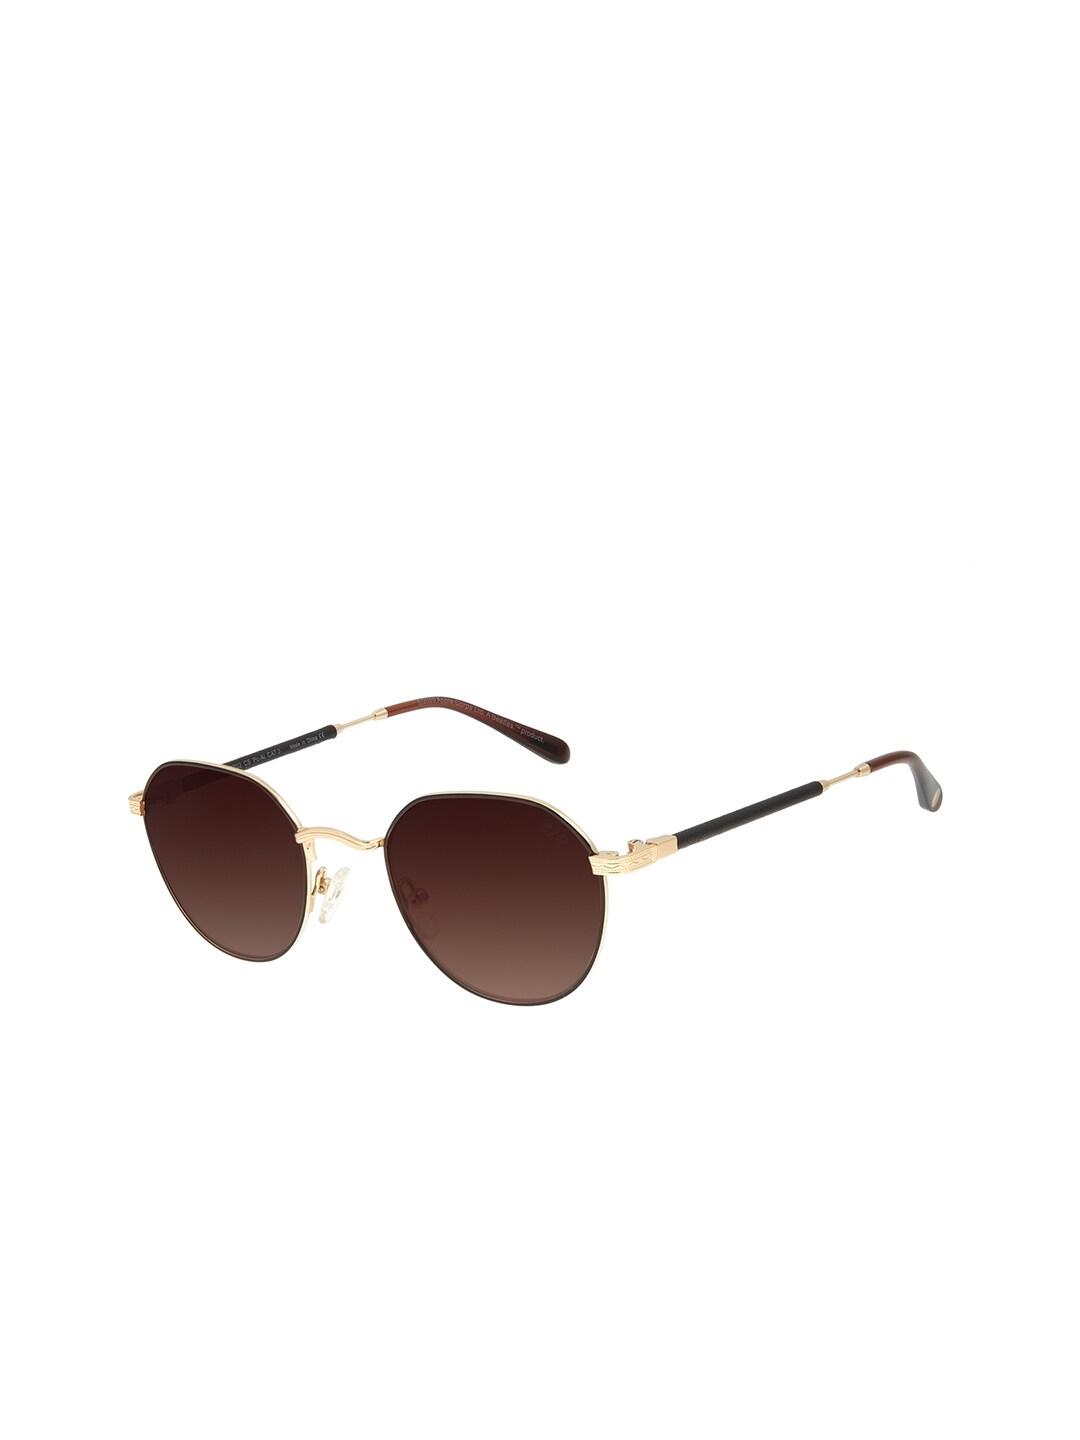 Chilli Beans Unisex Bronze Lens & Gold-Toned Oval Sunglasses with UV Protected Lens